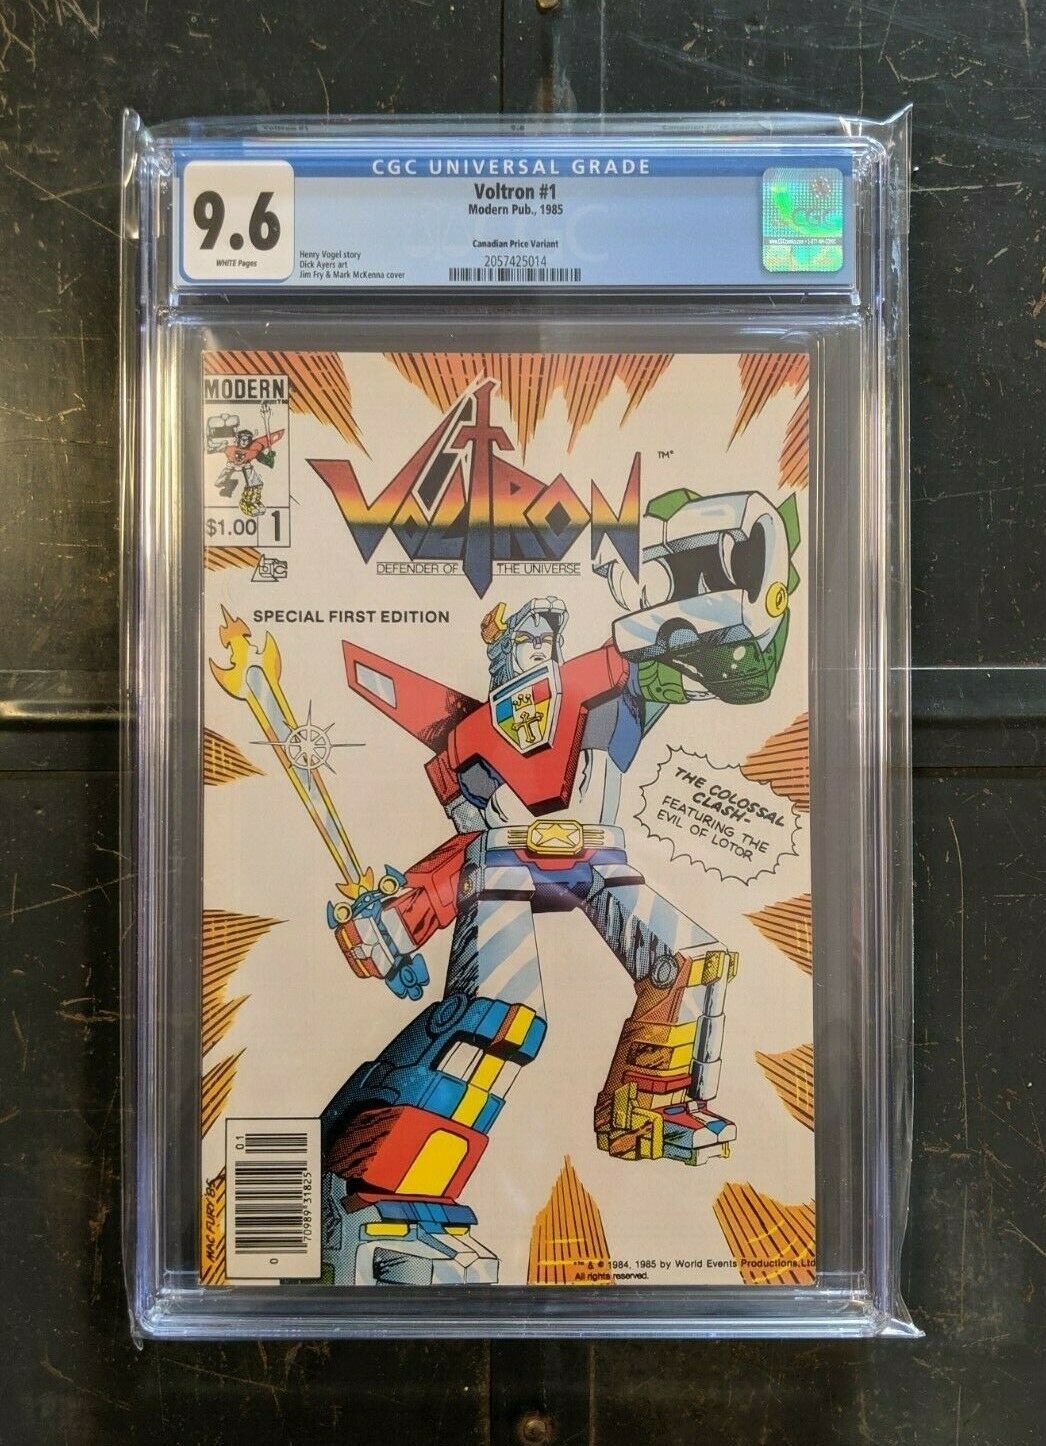 **SCARCE CANADIAN VARIANT** Voltron #1 (Modern, 1985) CGC 9.6 NM+ White Pages!